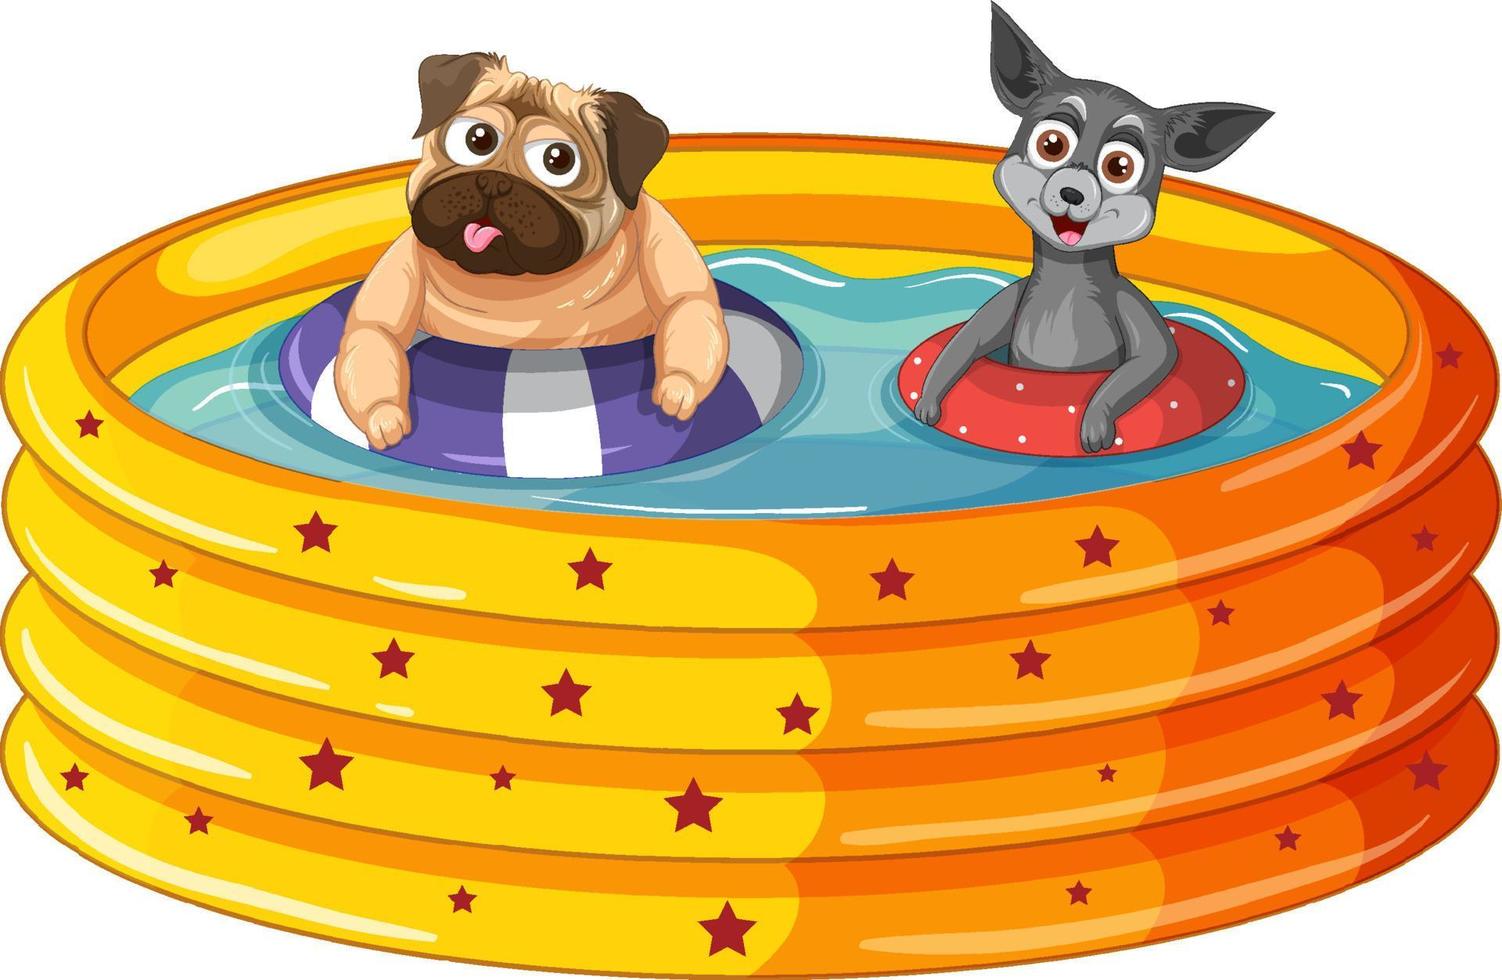 A Happy dog with rubber ring in Inflatable pool on white background vector